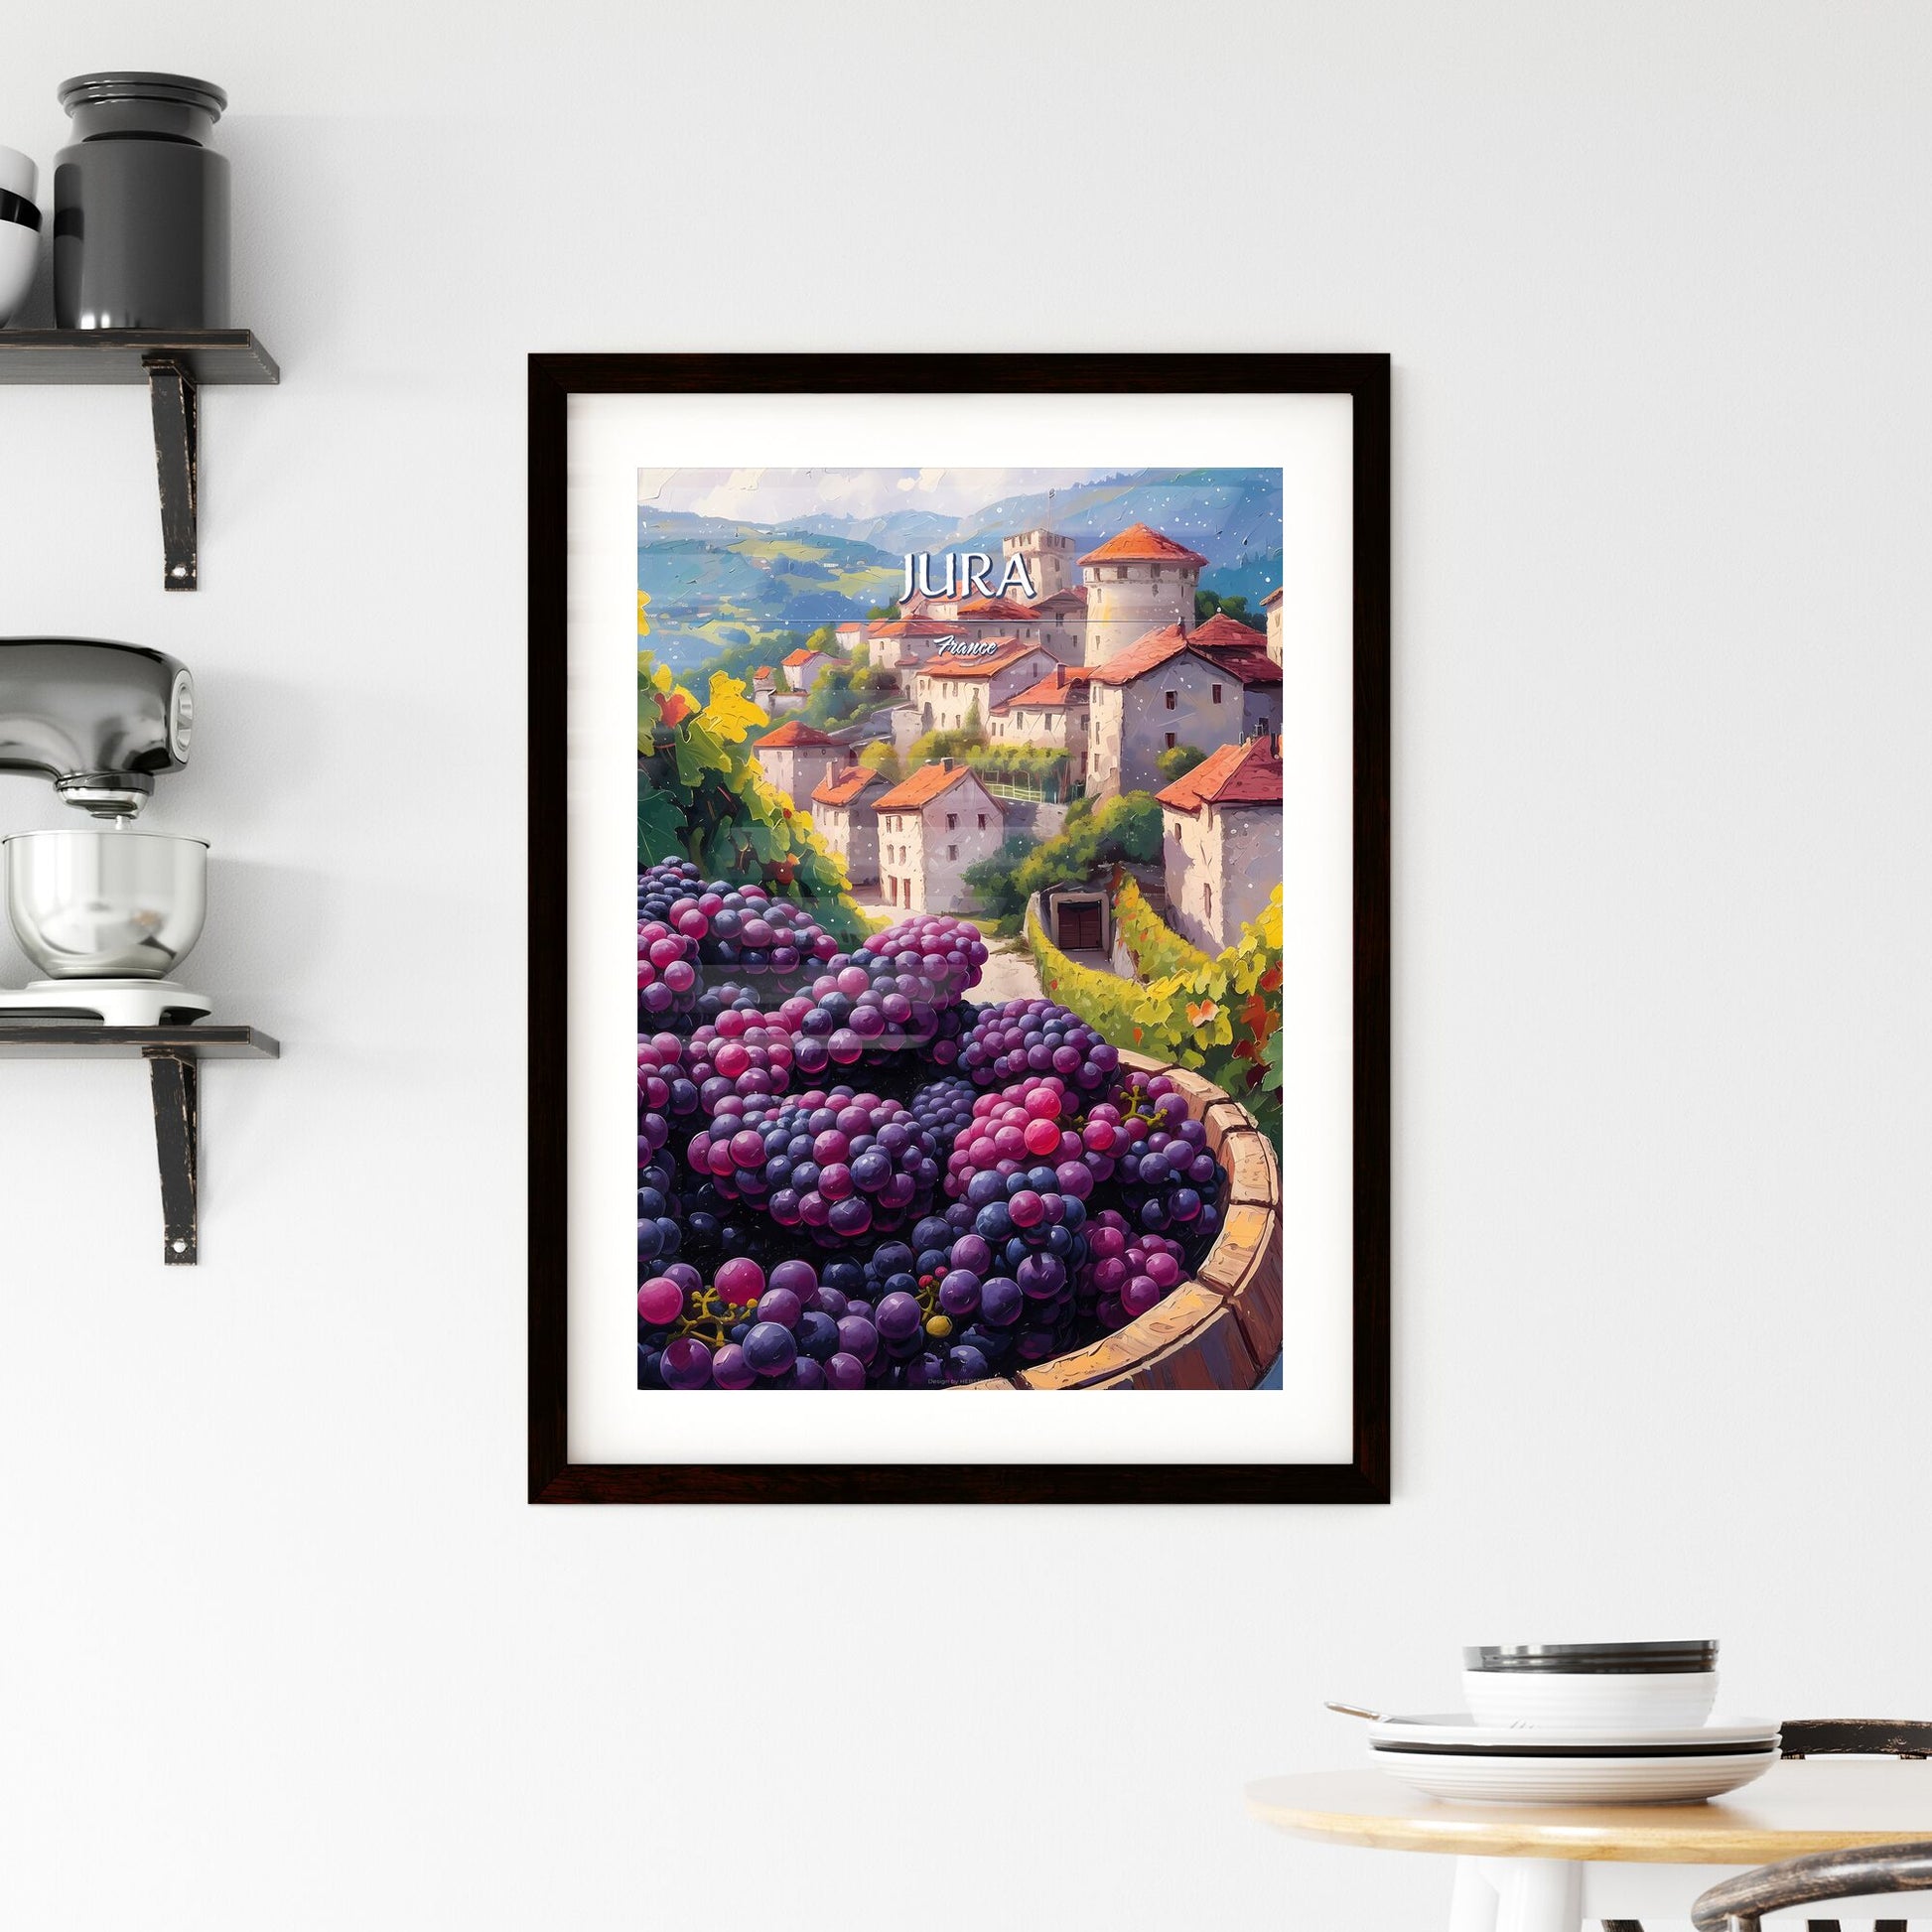 Jura, France - Art print of a painting of a town with grapes Default Title